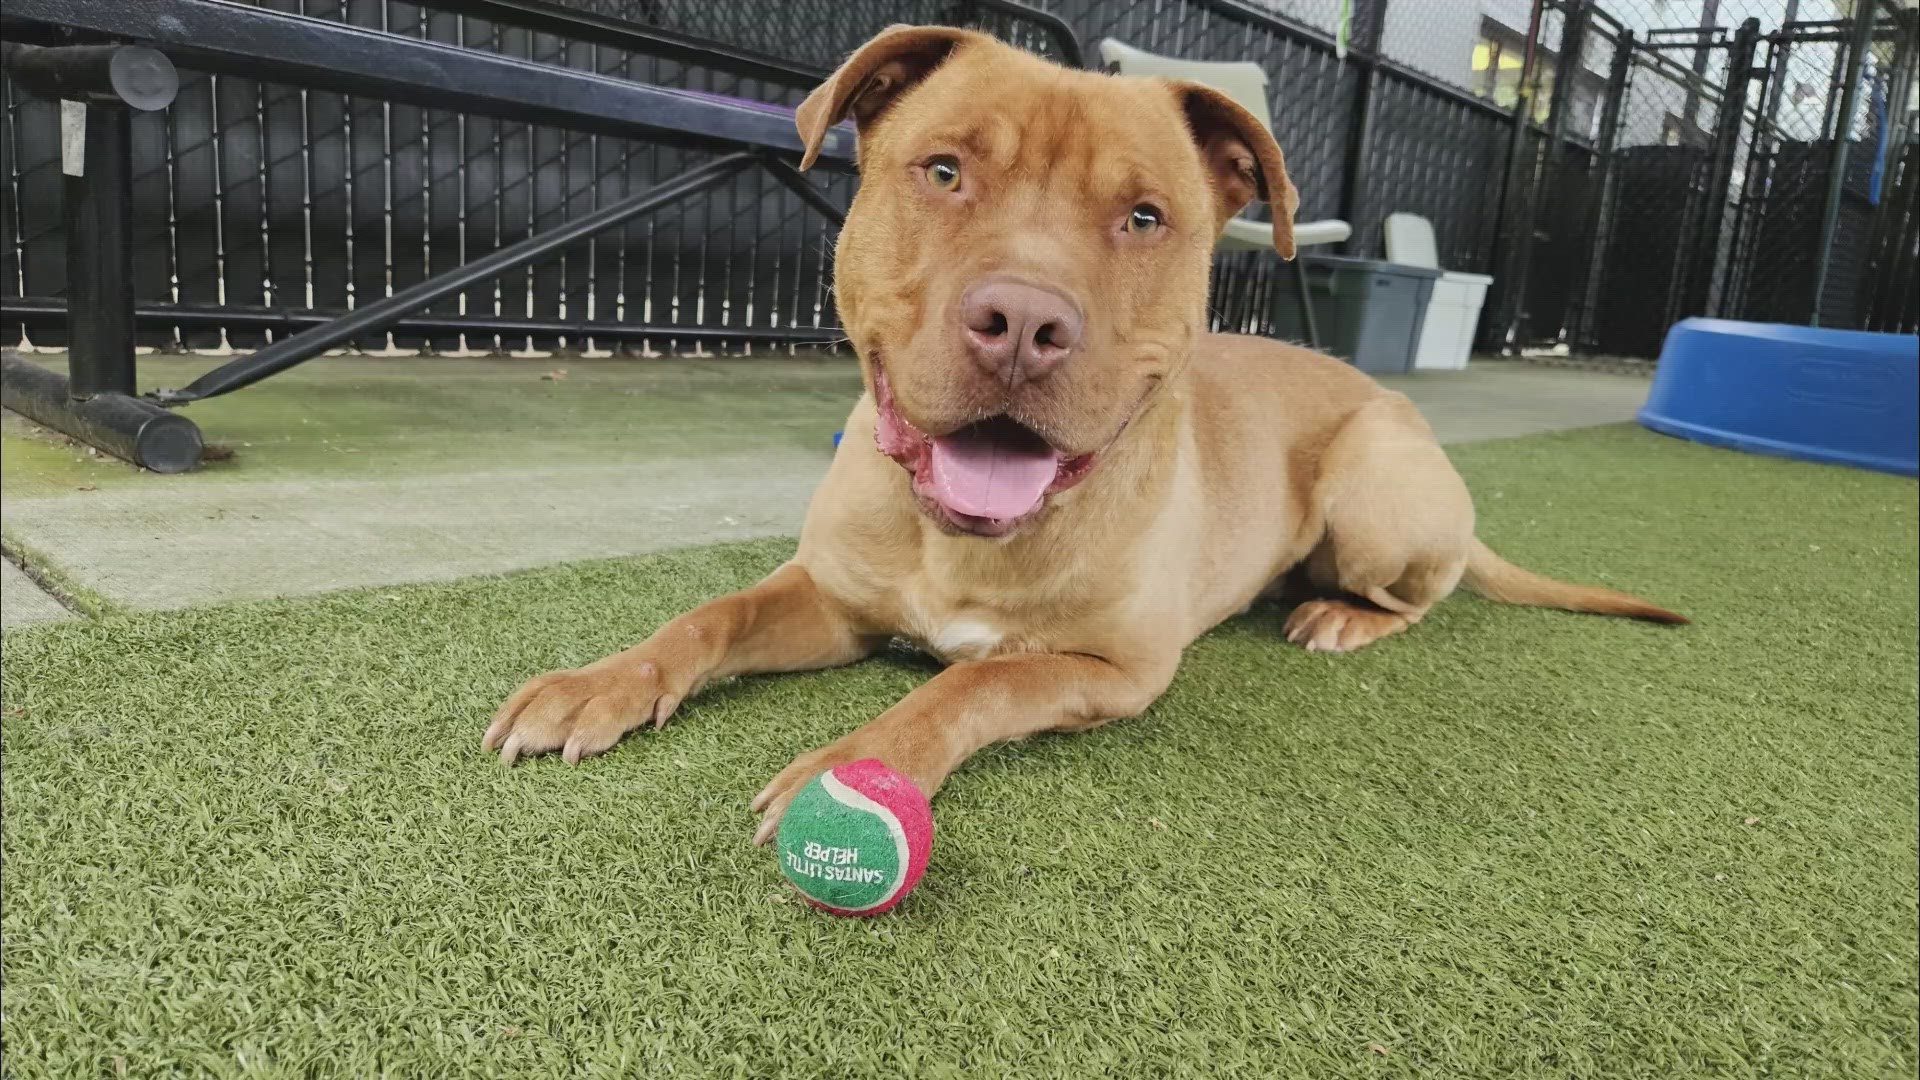 KING 5 is featuring several Seattle area dogs and cats in need of homes in honor of a month-long pet adoption and donation campaign via NBCUniversal Local.